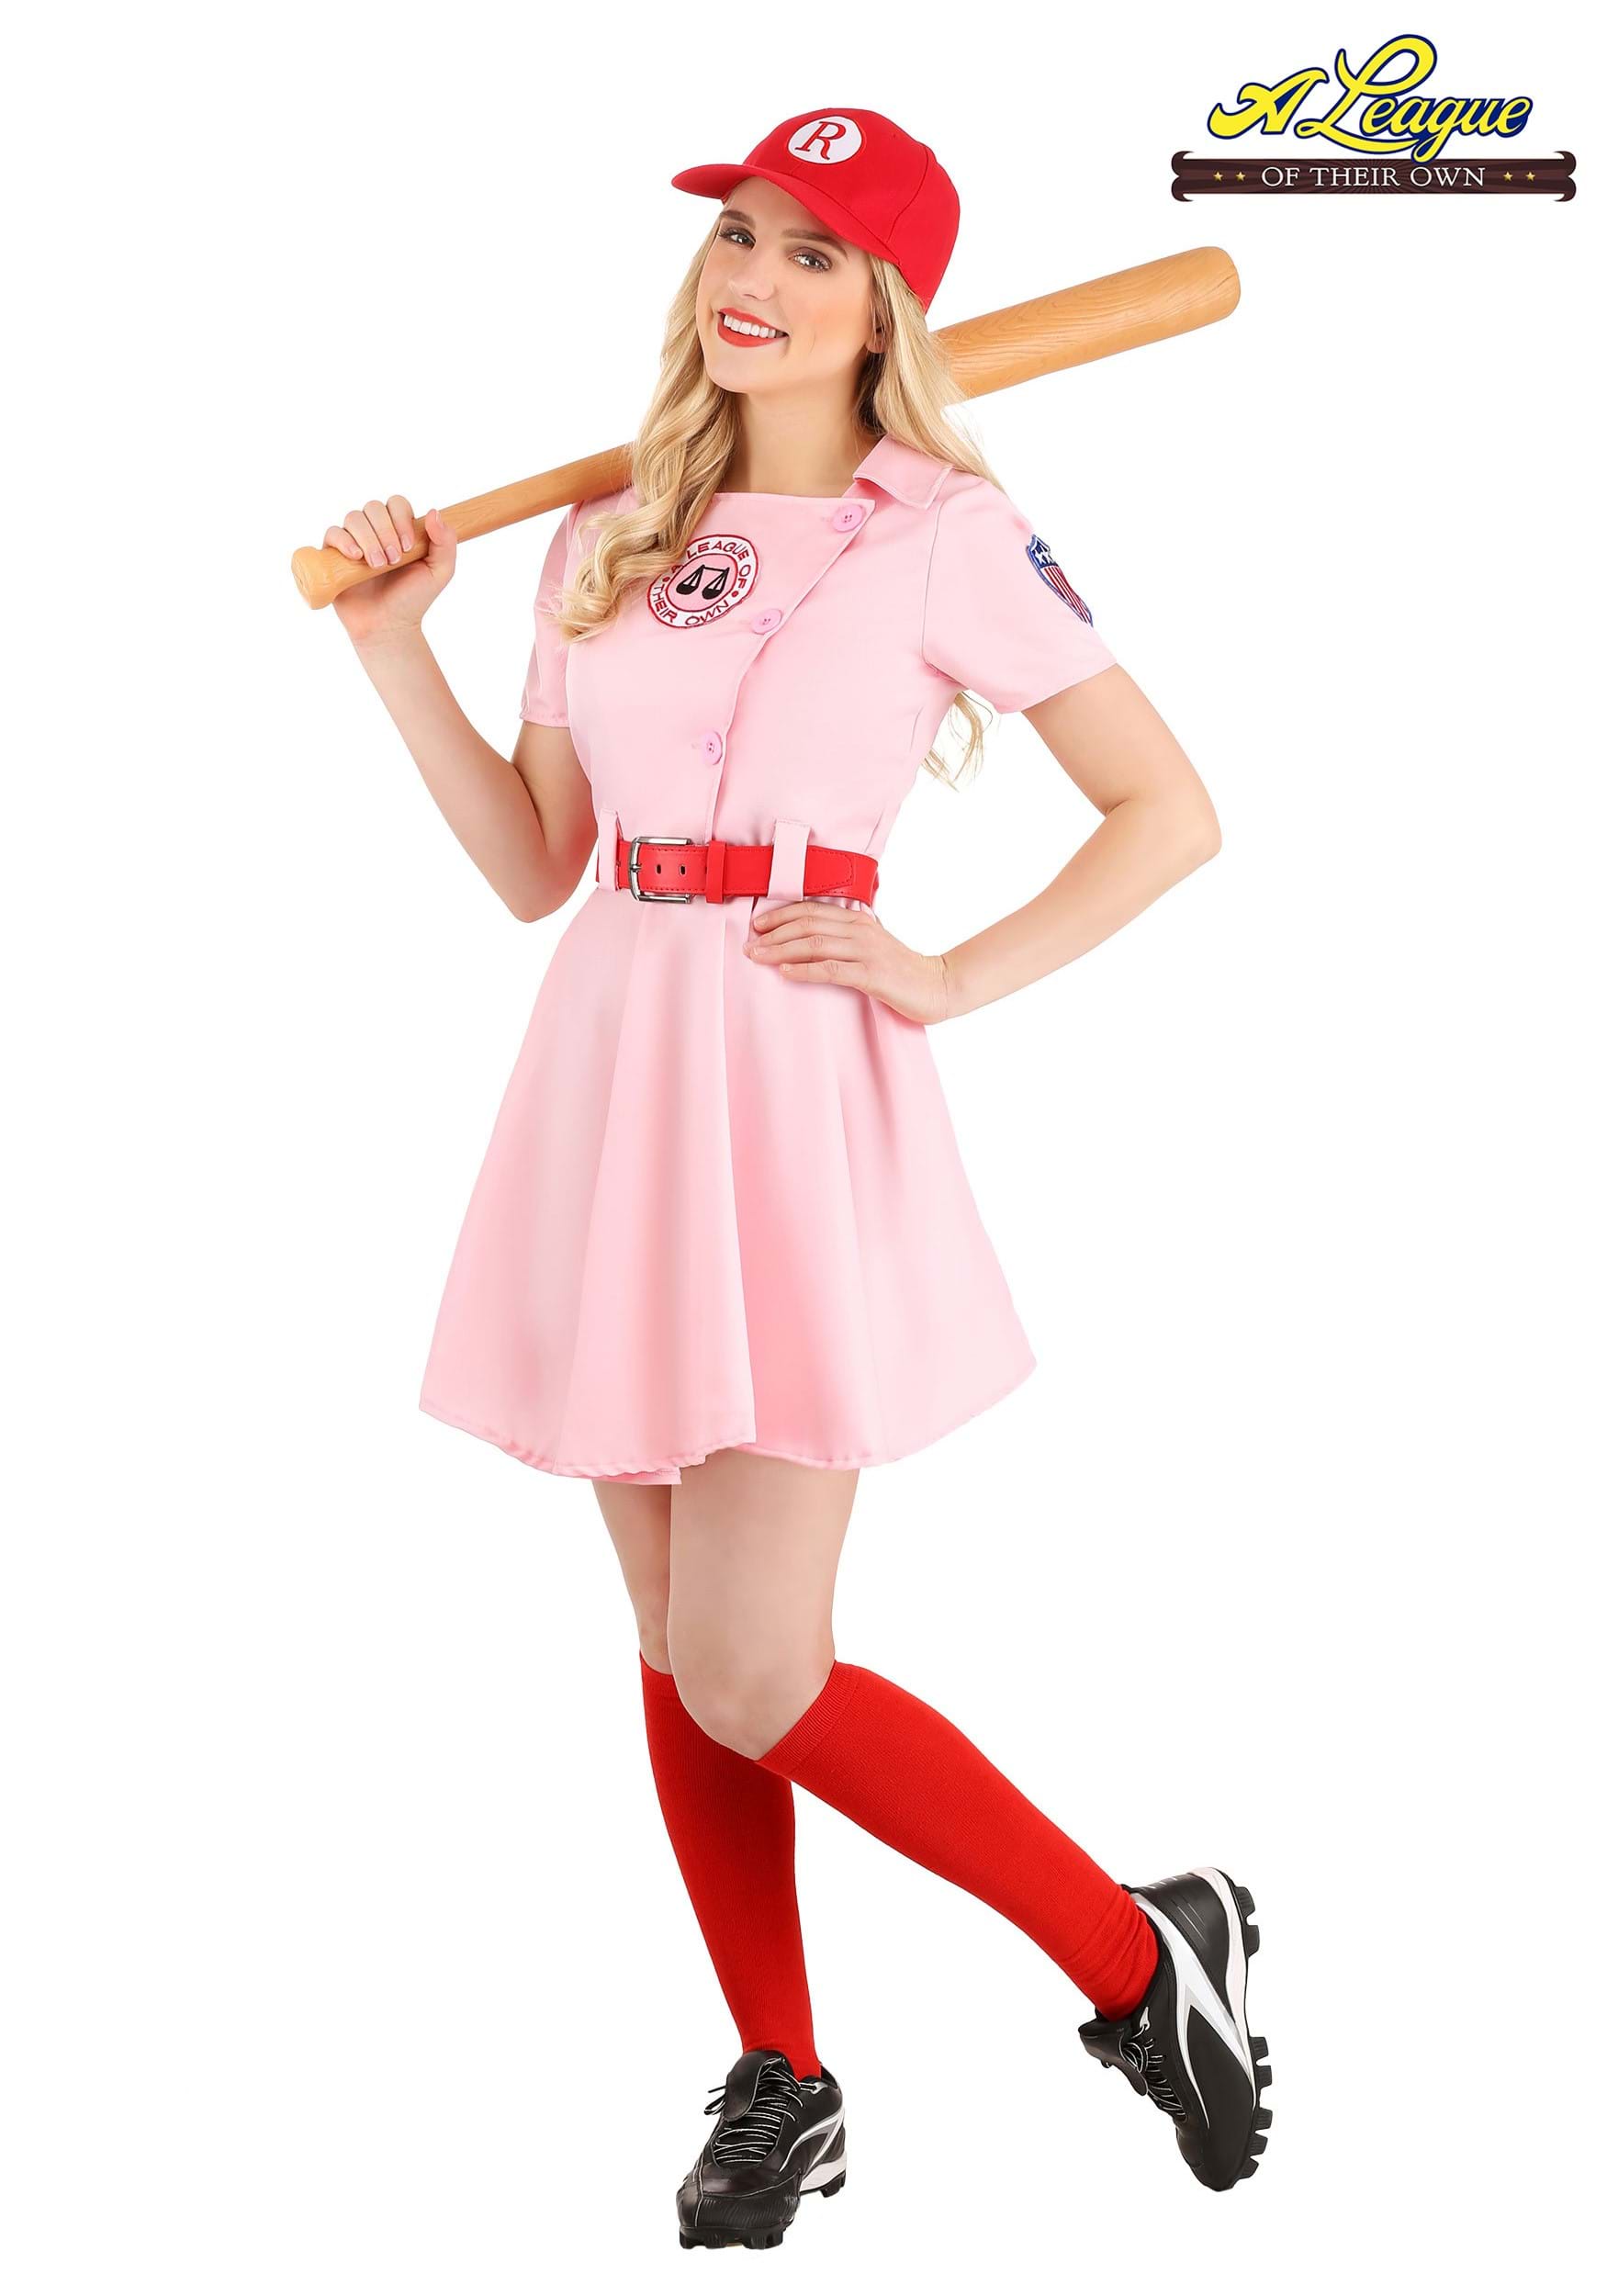 Toddler A League of Their Own Kit Costume - 4T